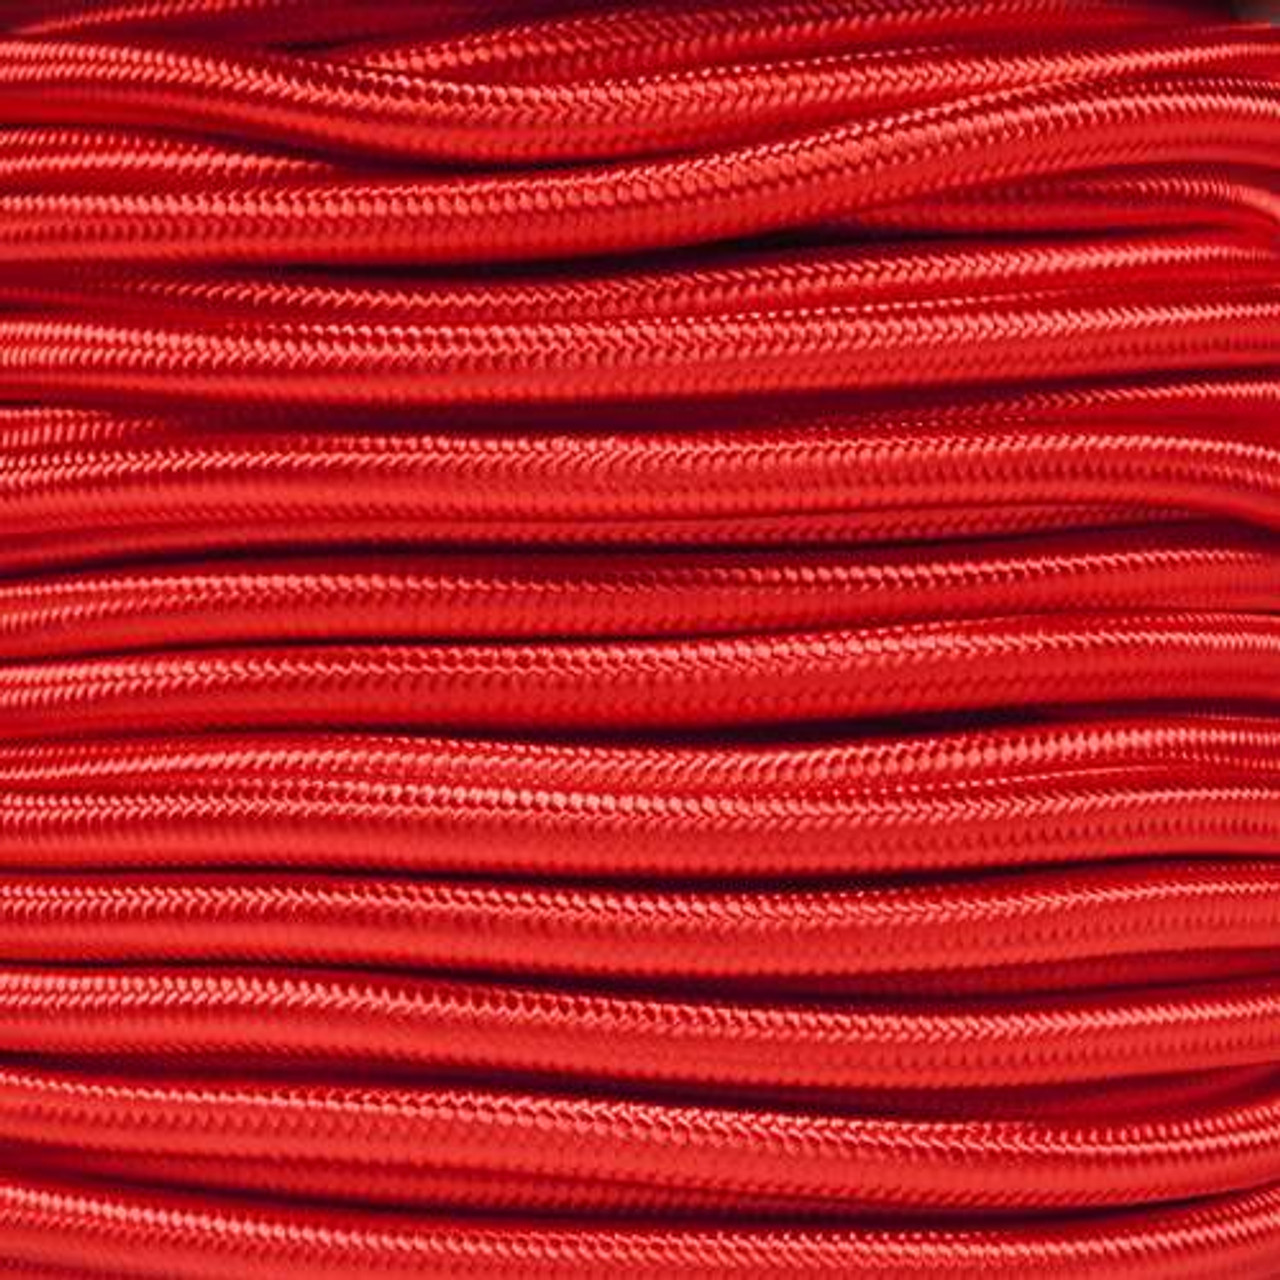 Imperial Red - 1/4 Shock Cord